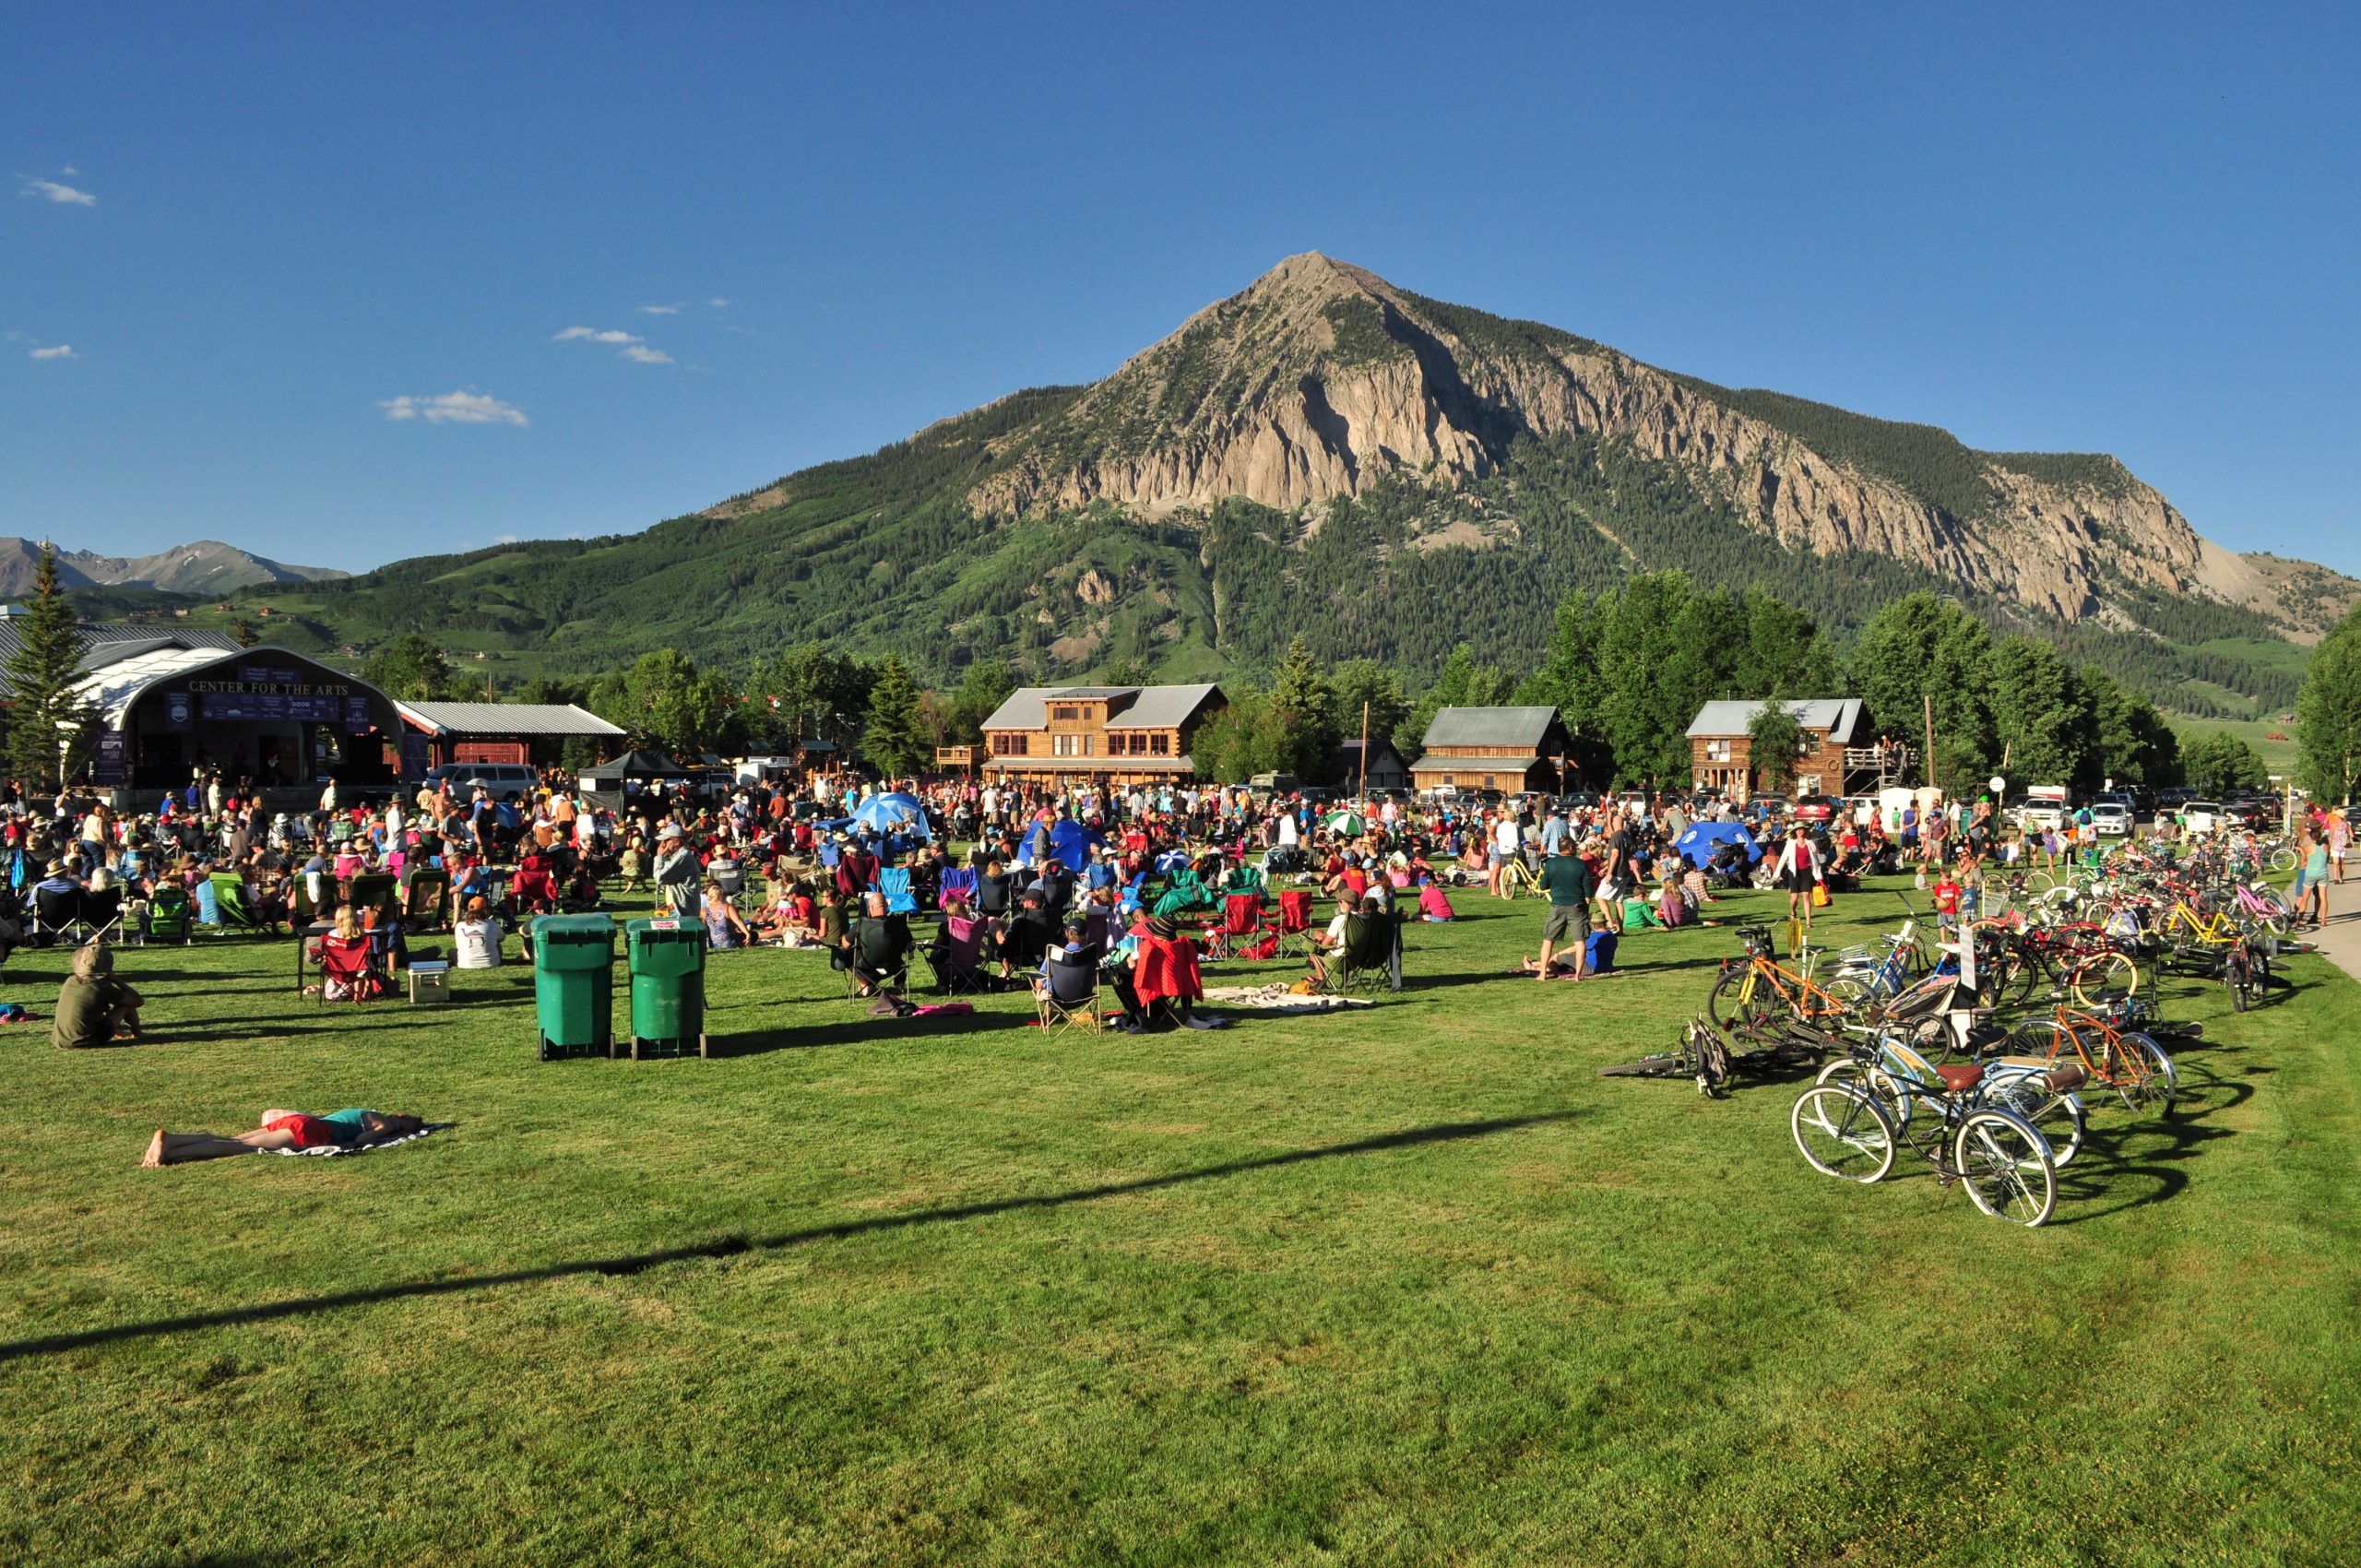 An event on the lawn of the Arts Center in Crested Butte, in Crested Butte, Colorado.